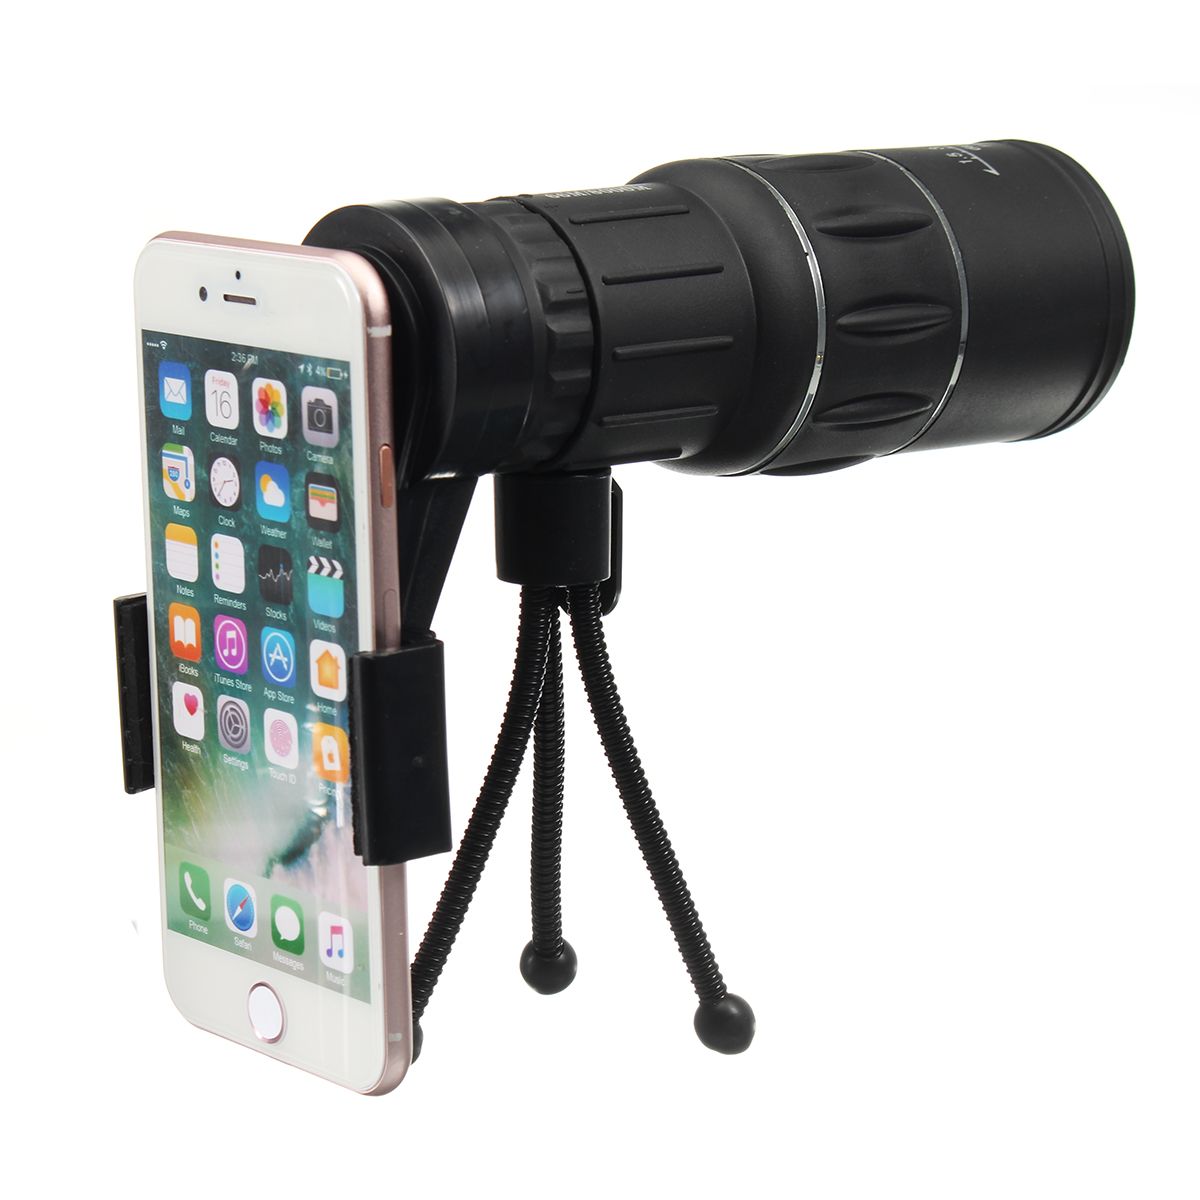 16X-Magnification-16x52-Telescope-Telephoto-Lens-with-Tripod-for-Mobile-Phone-Smartphone-Photography-1633173